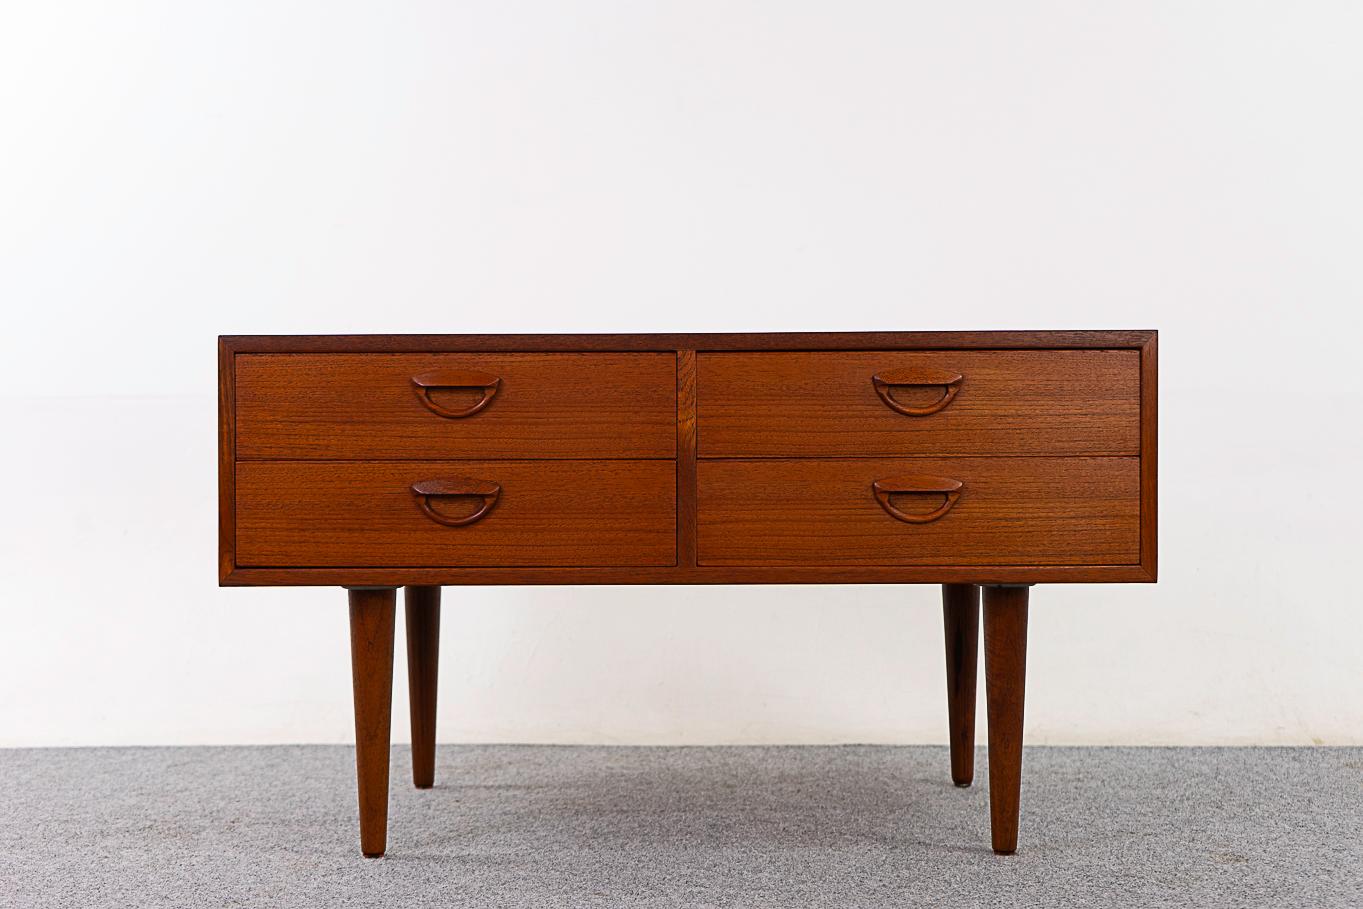 Teak Danish modern bedside table by Kai Kristiansen, circa 1960's. Beautifully veneered case rests on slender, tapered legs. Sleek drawers with dovetail construction and sweet handles. Add the extra storage you've always needed!

Please inquire for